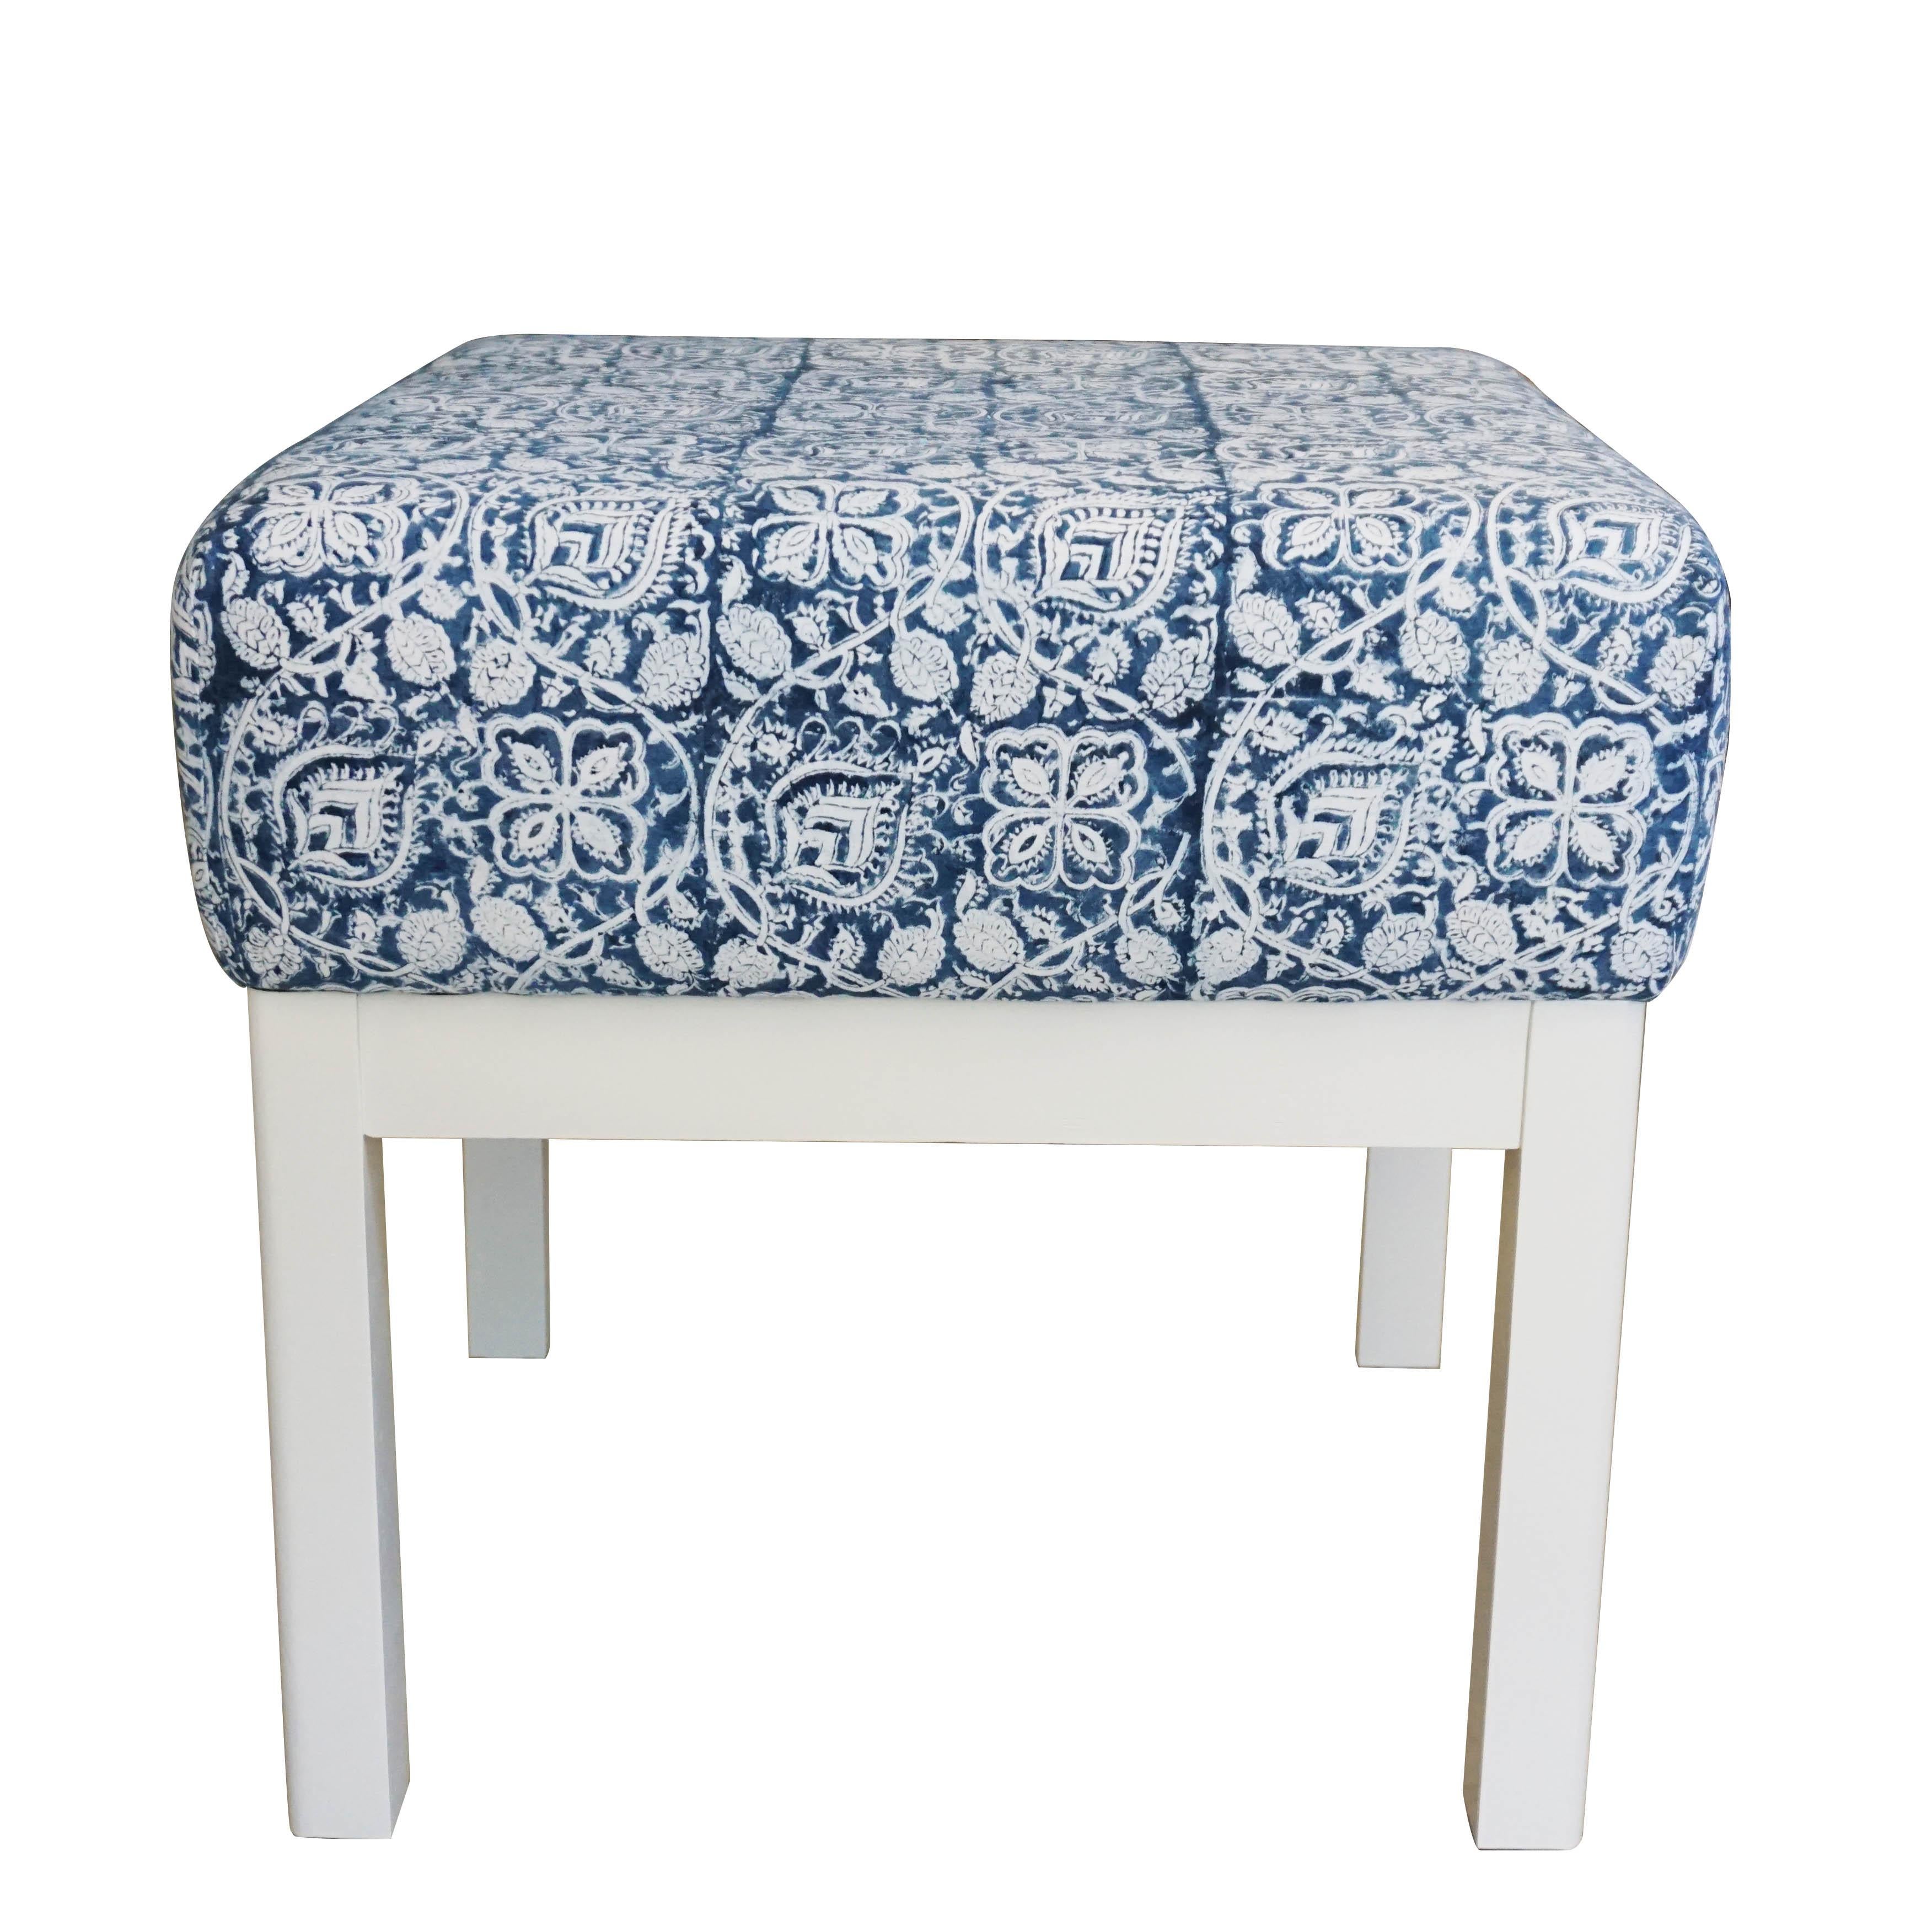 A pair of Classic square low stools with cushions upholstered in hand block printed fabric. This particular print was manufactured for Ralph Lauren and is of high quality. The solid wooden frames have been refinished in satin finish dove white.